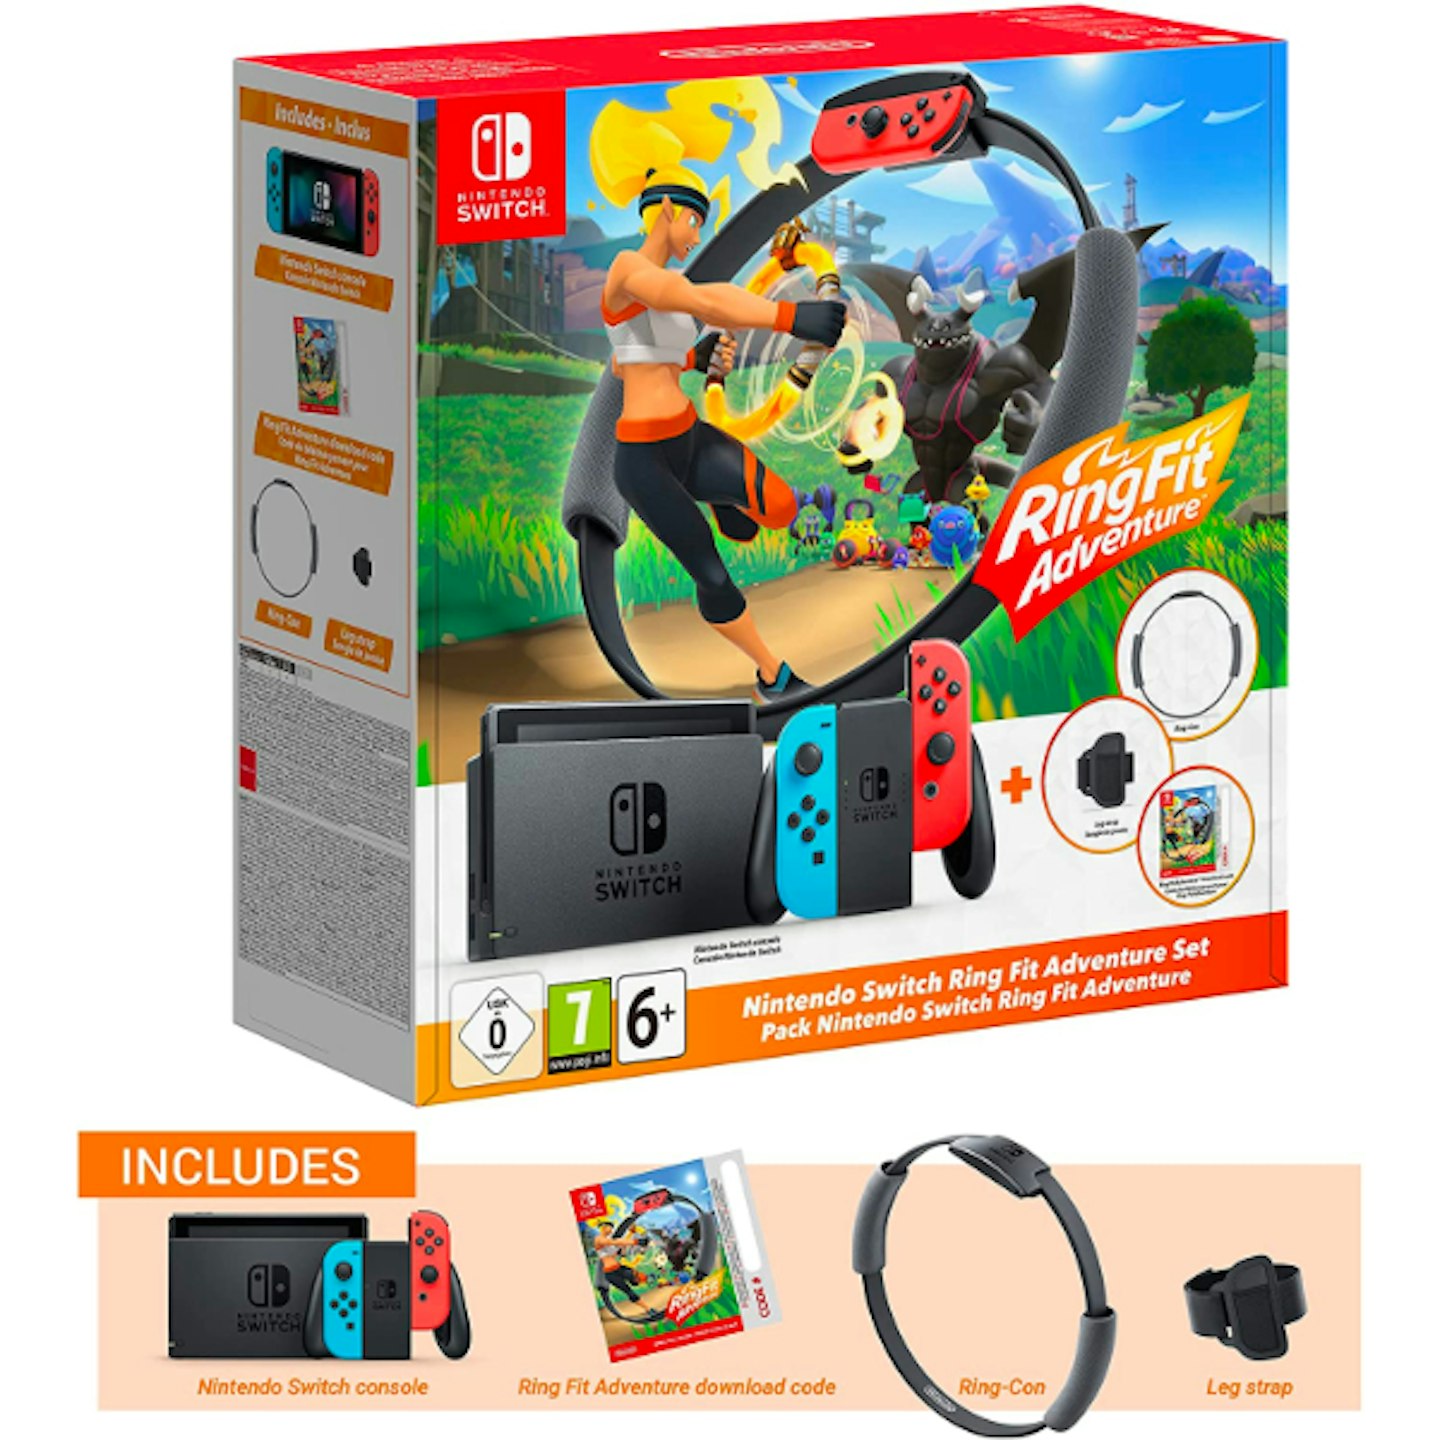 Nintendo Switch with Ring Fit Adventure